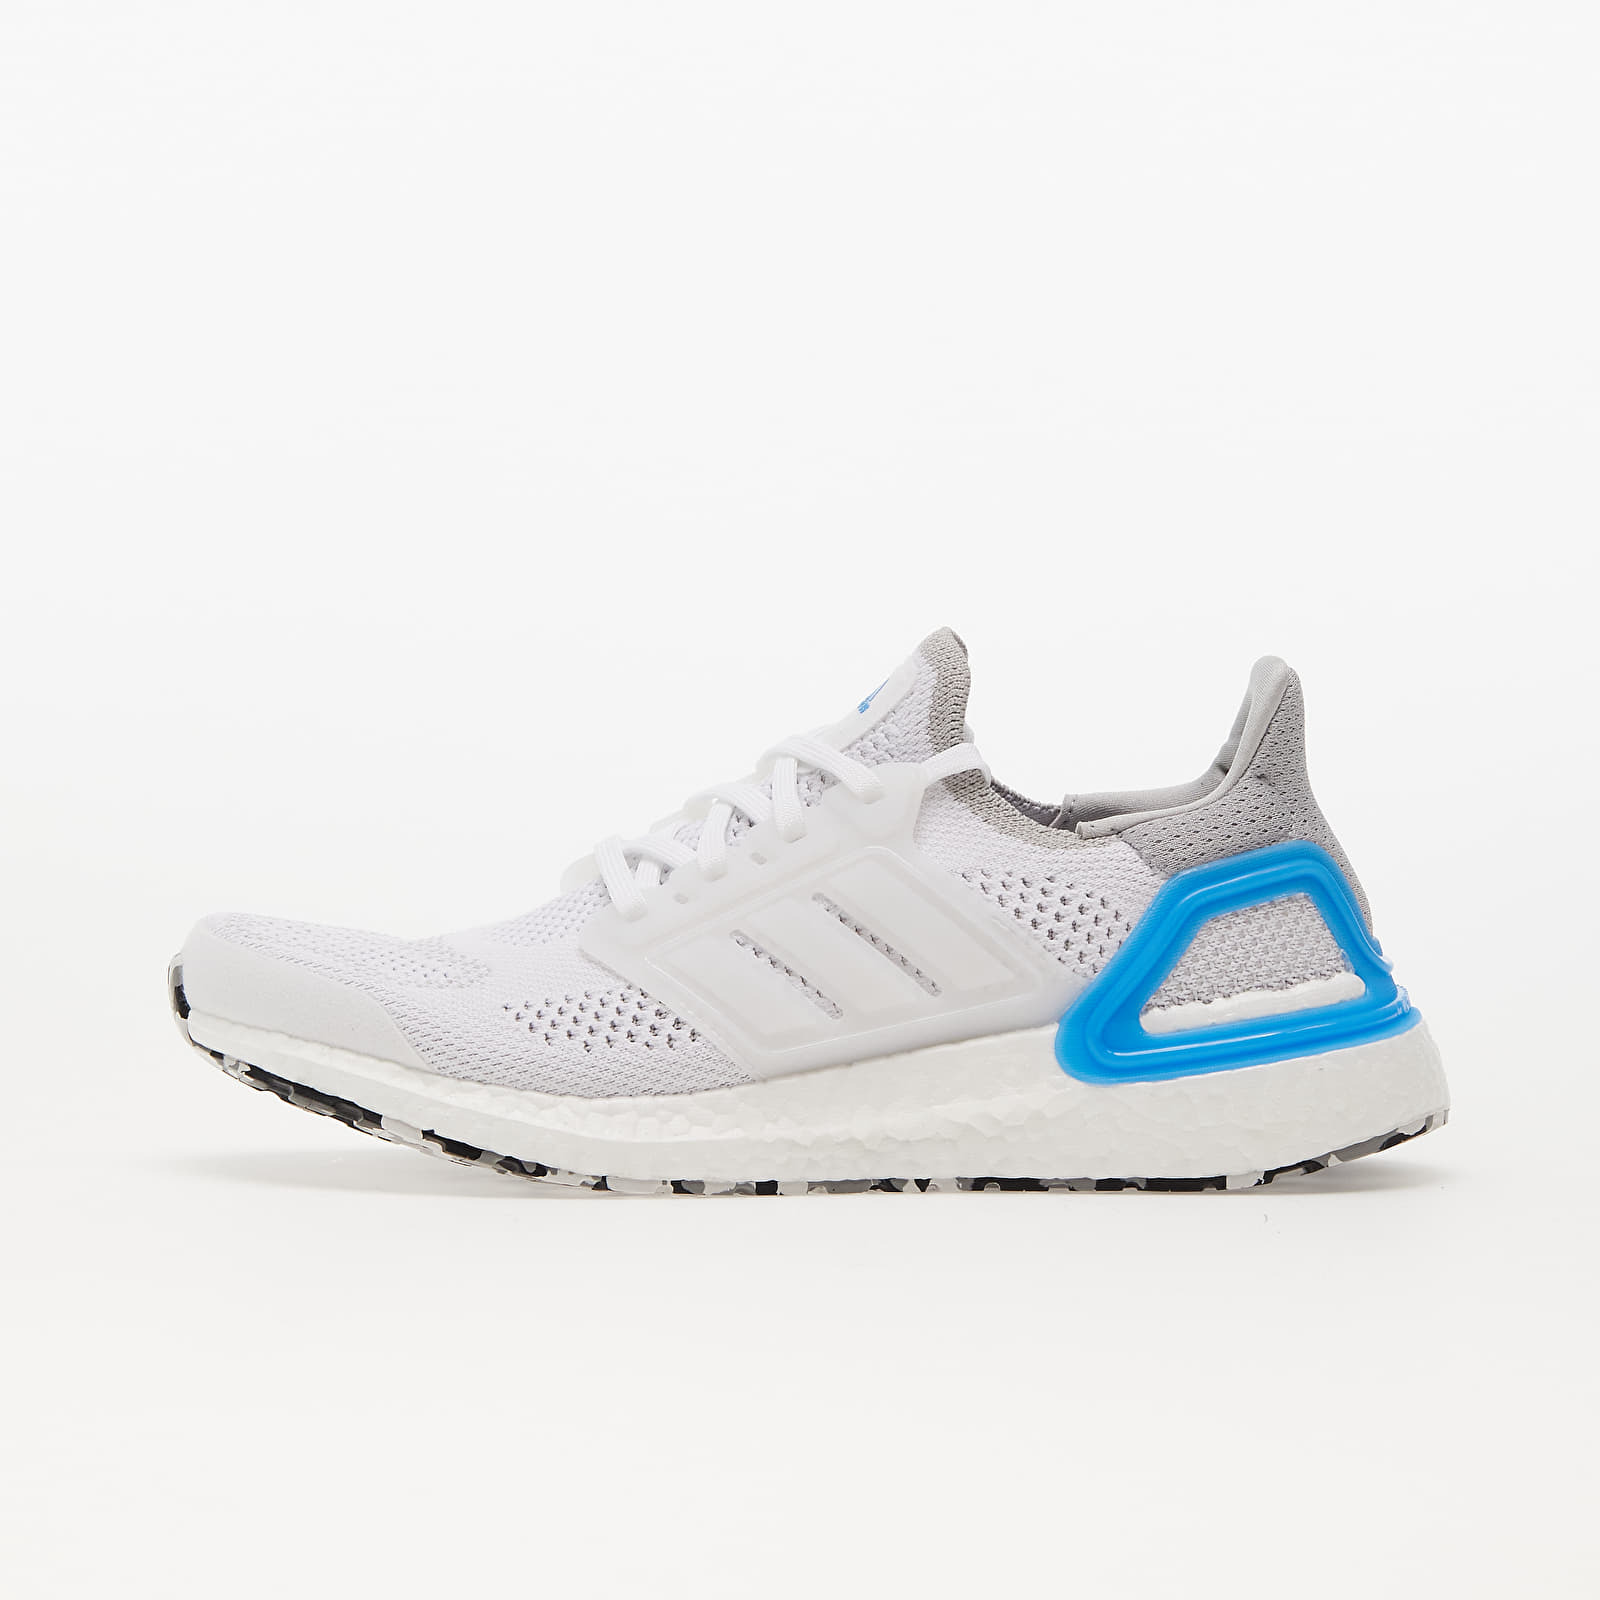 adidas UltraBOOST 19.5 Dna Ftw White/ Ftw White/ Pul Blue